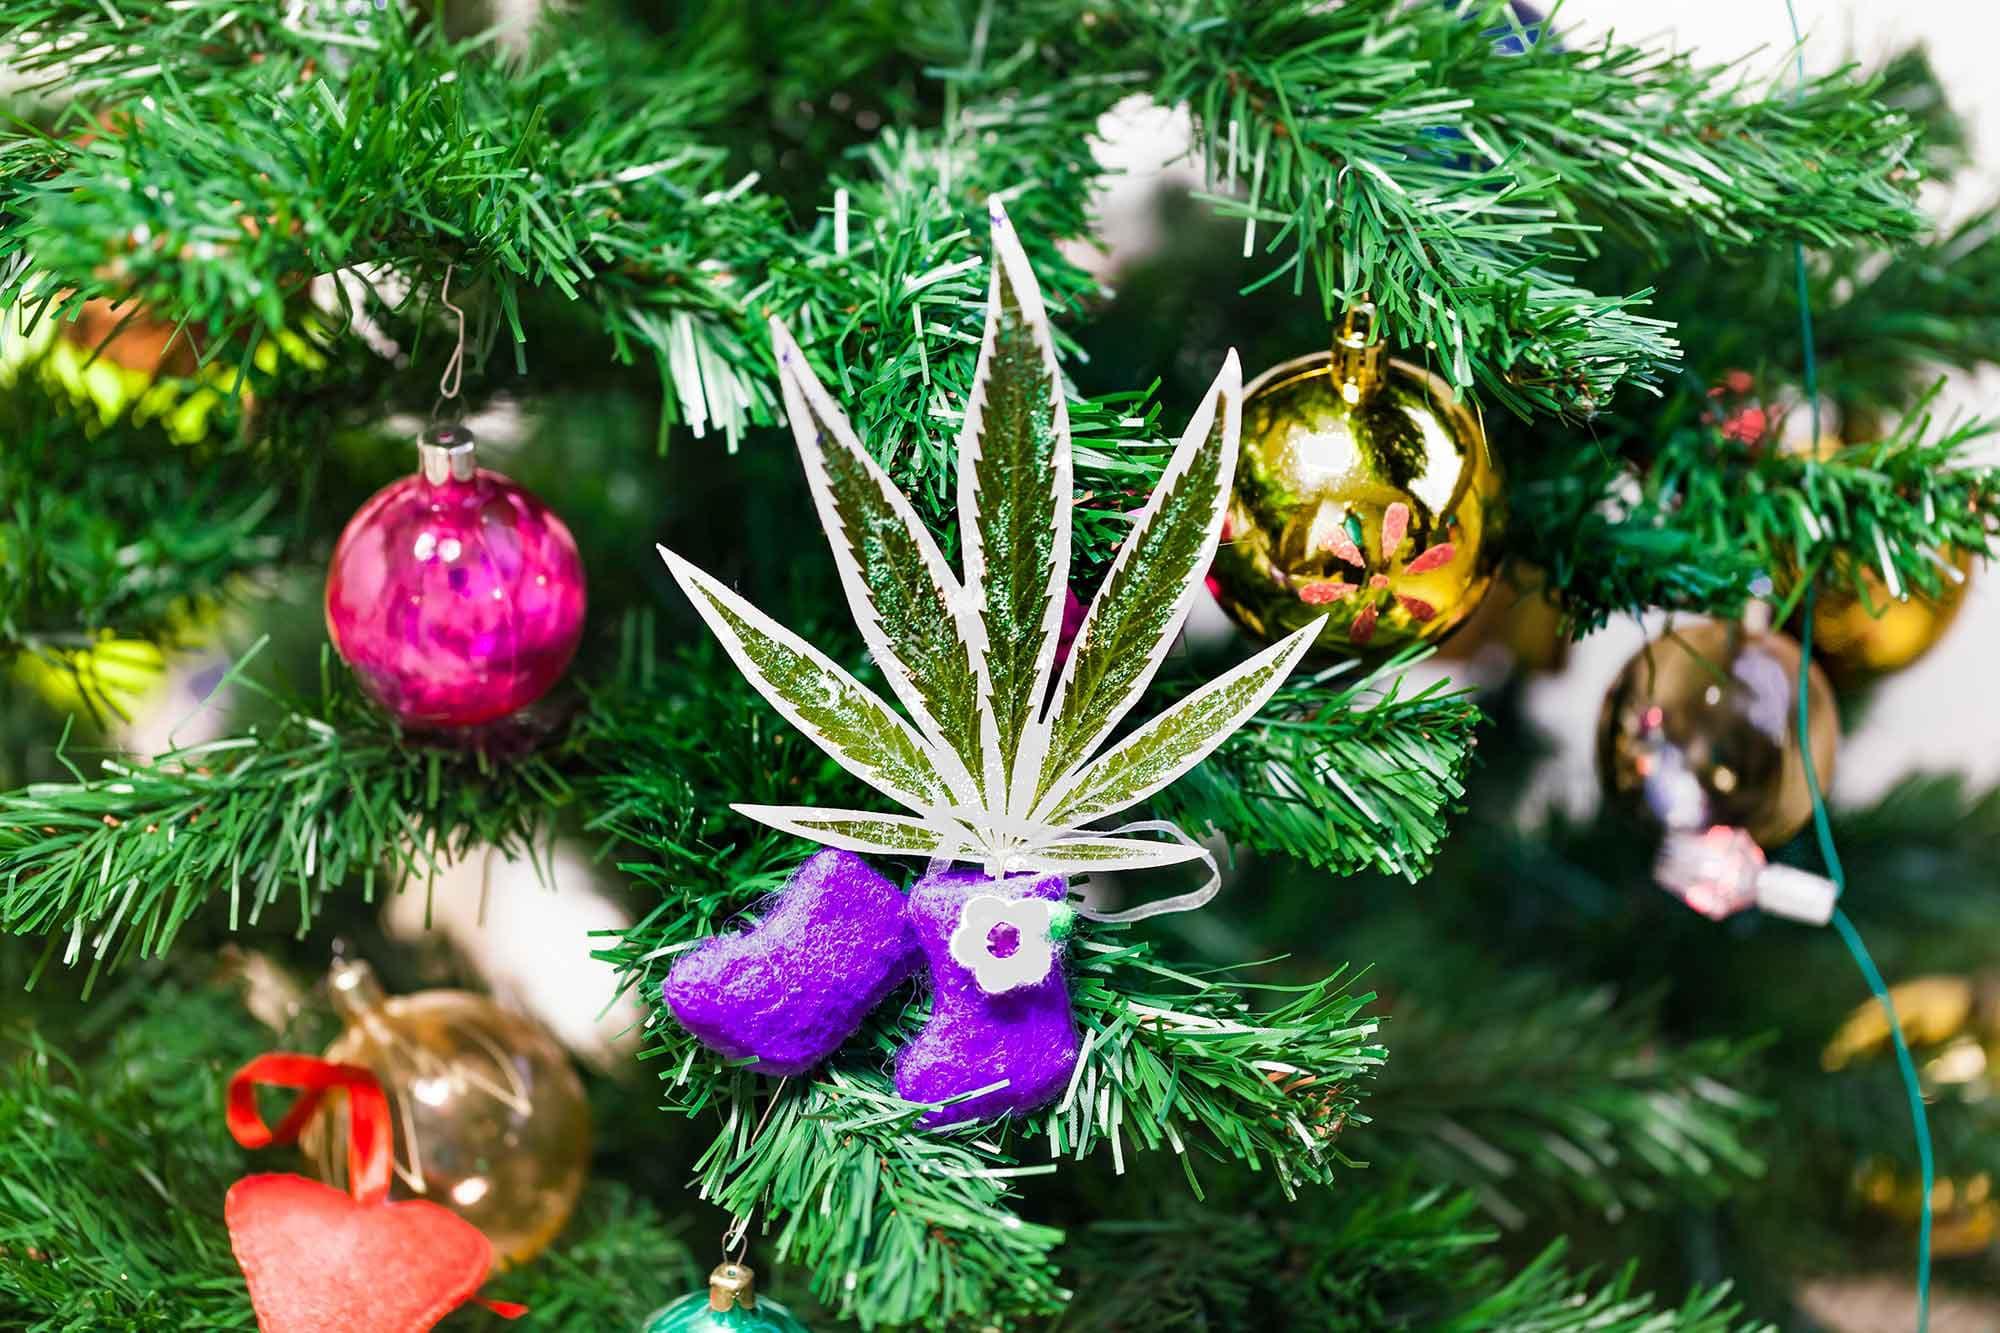 Five Dank-tacular gifts for every weed-lover on your list